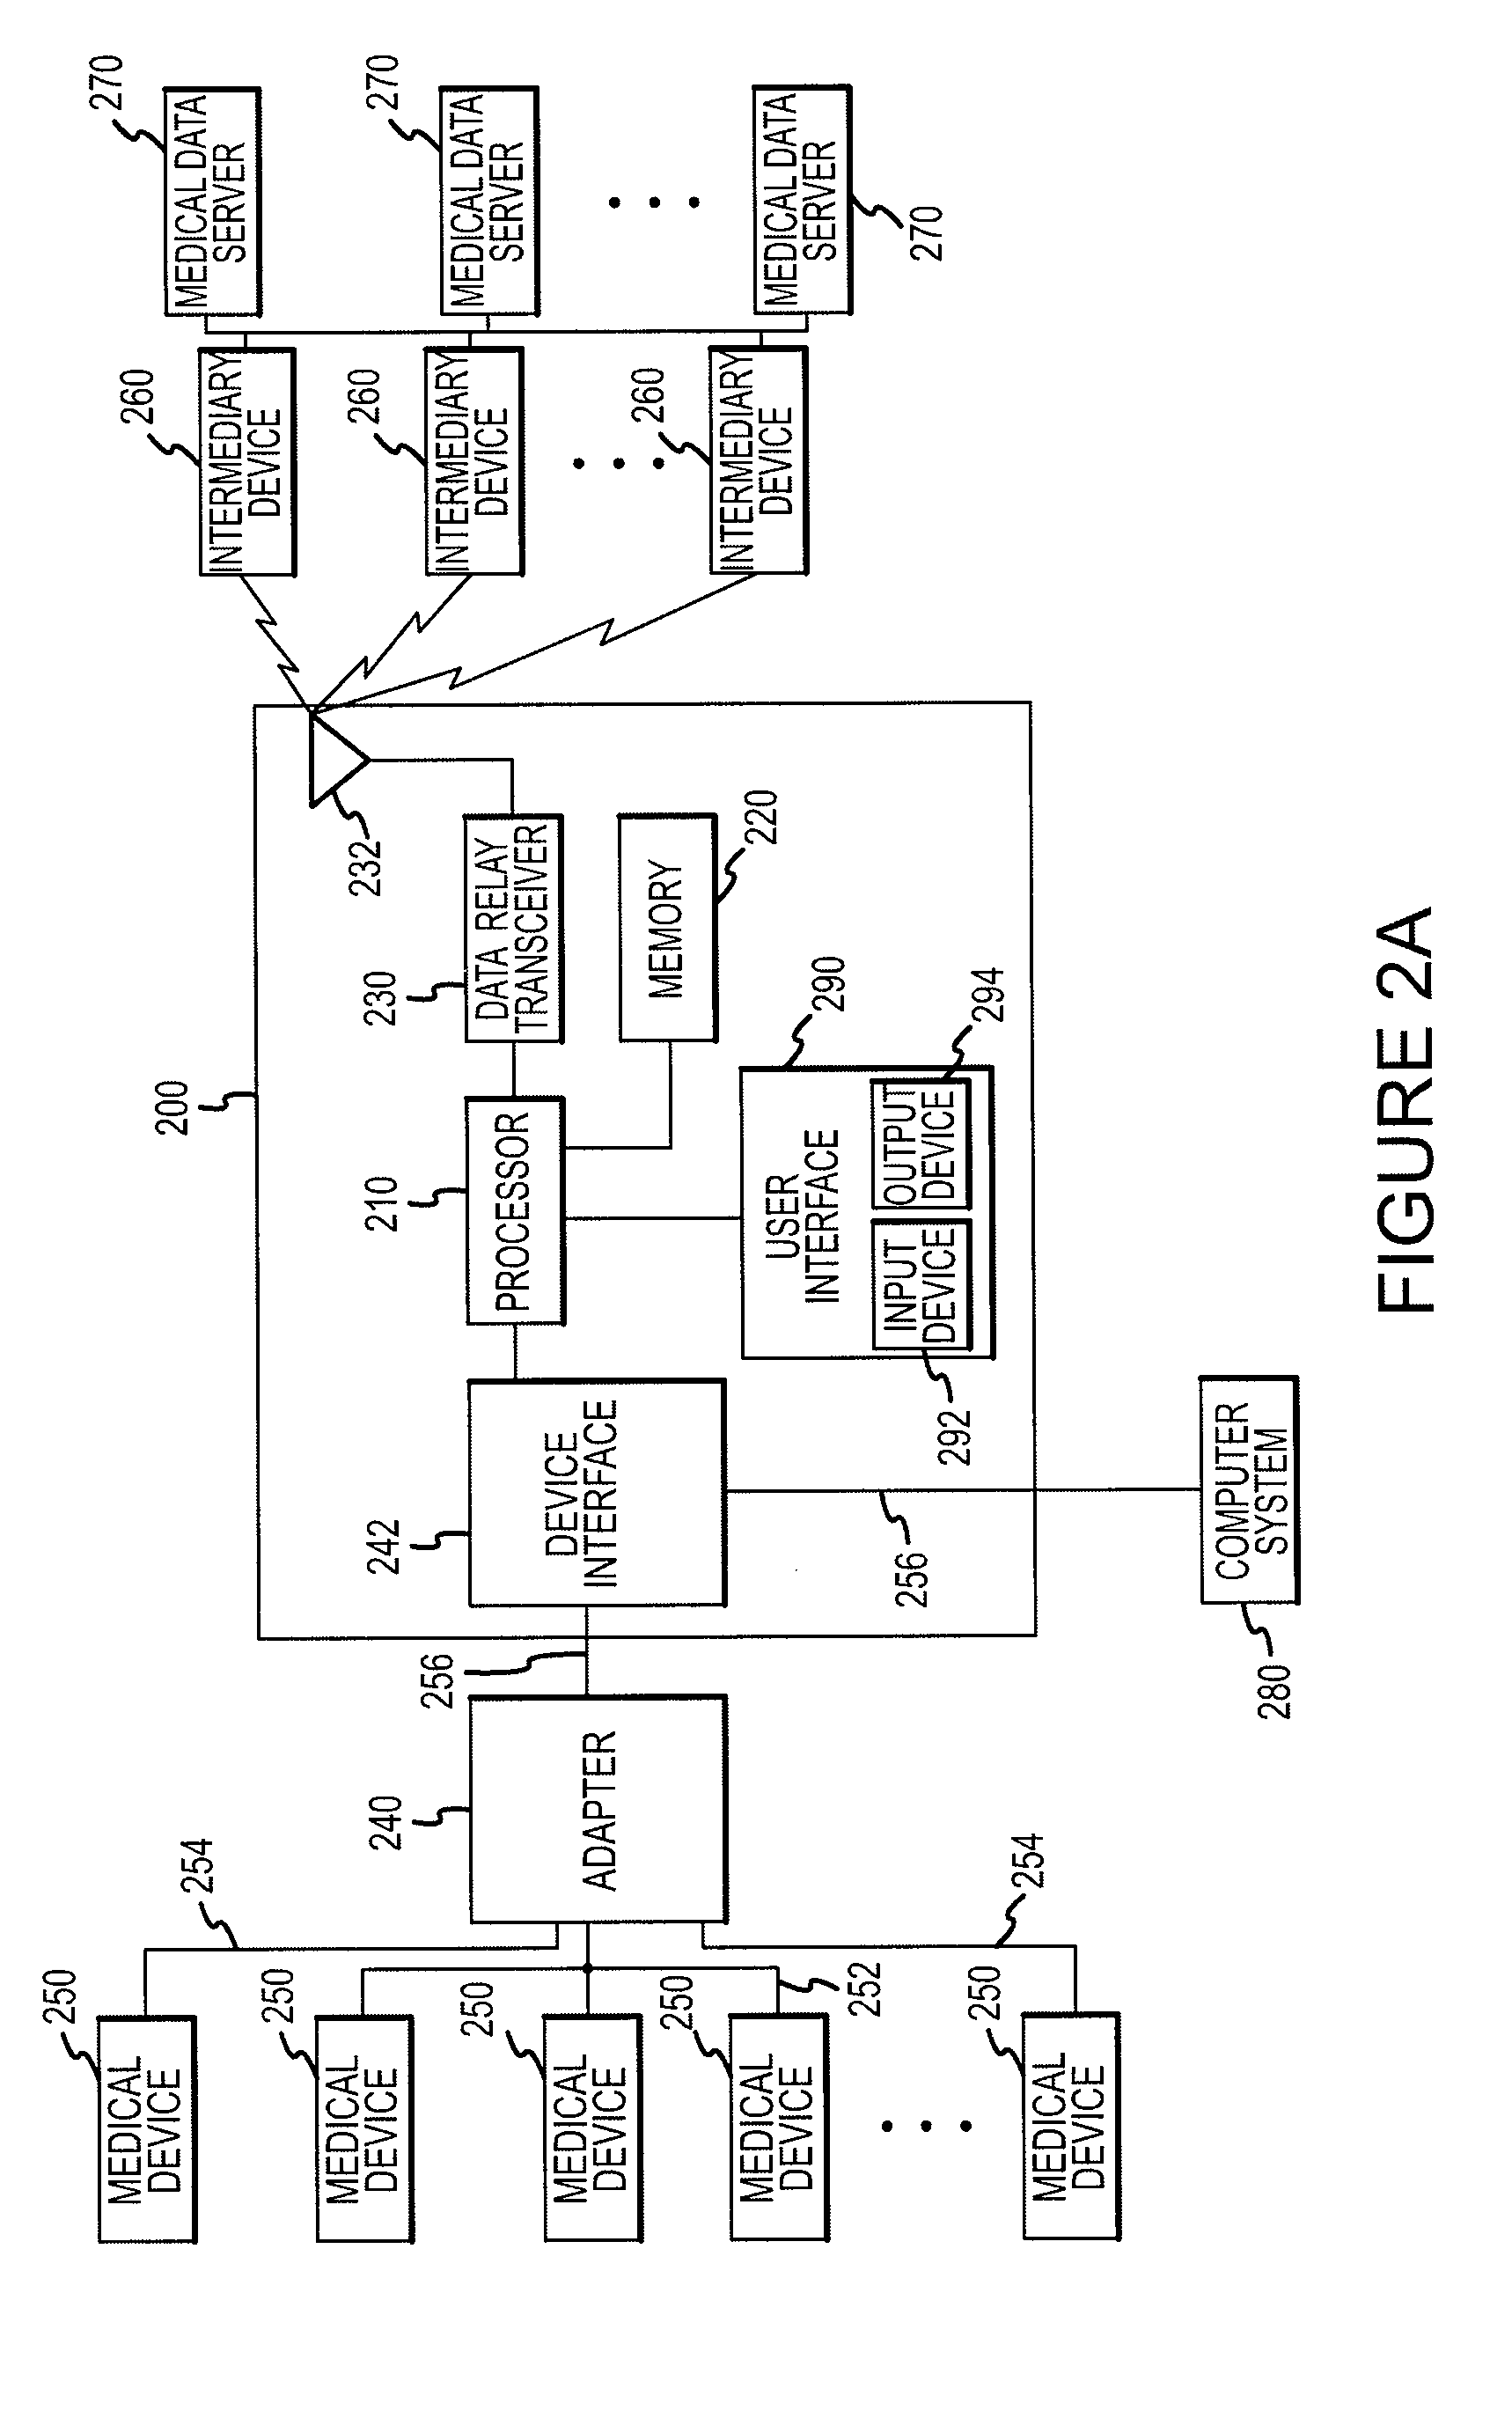 Systems for remote provisioning of electronic devices